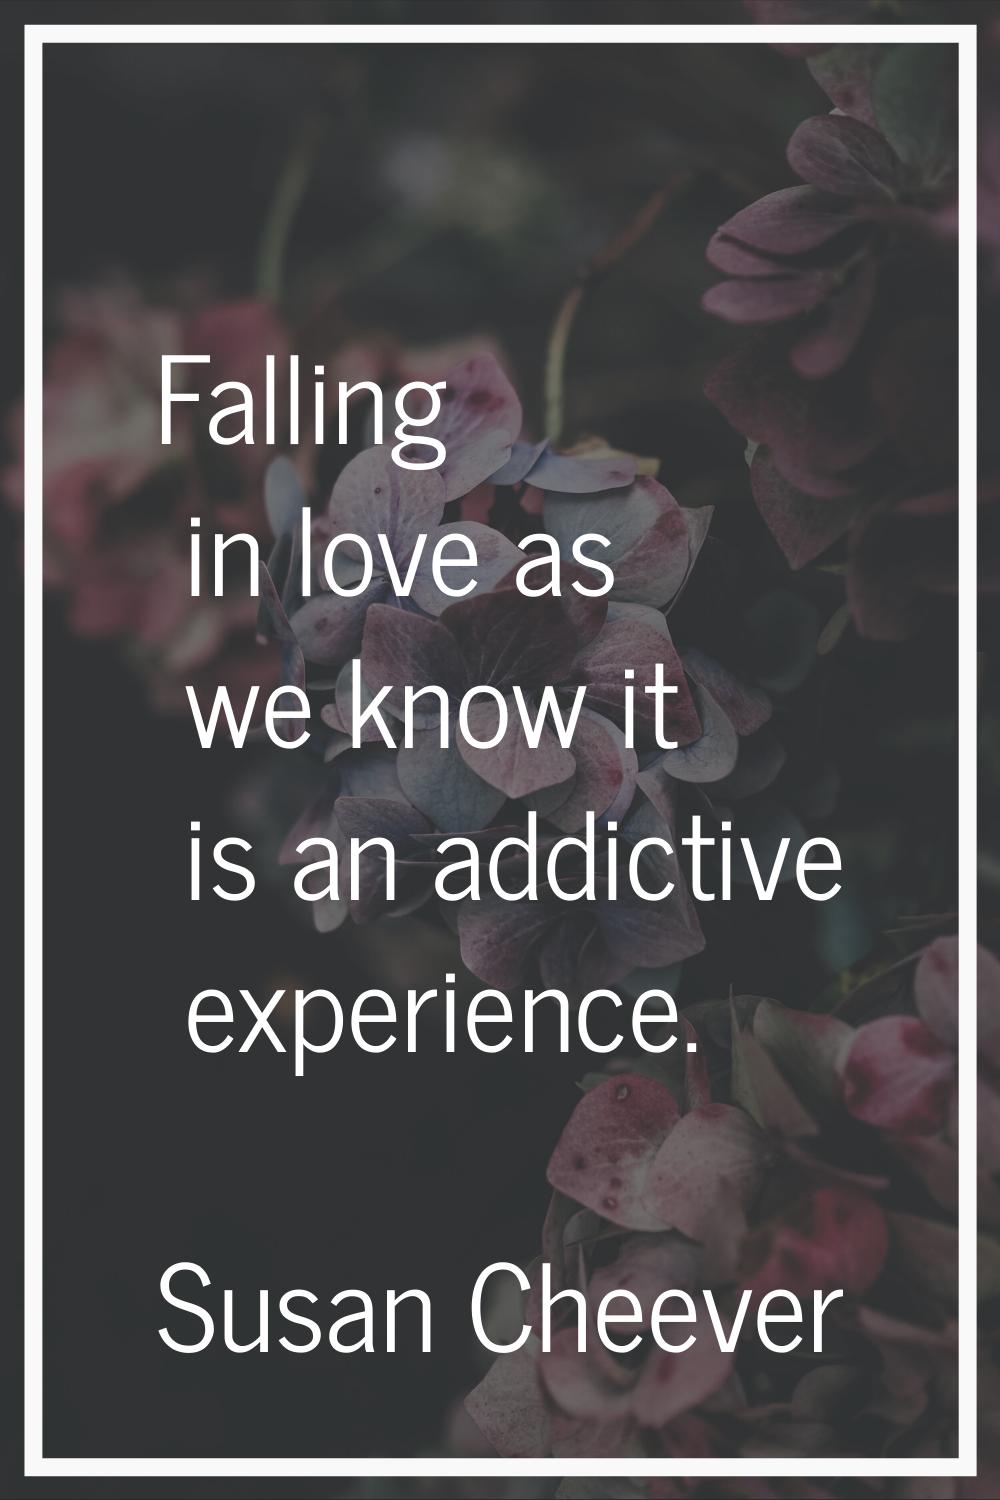 Falling in love as we know it is an addictive experience.